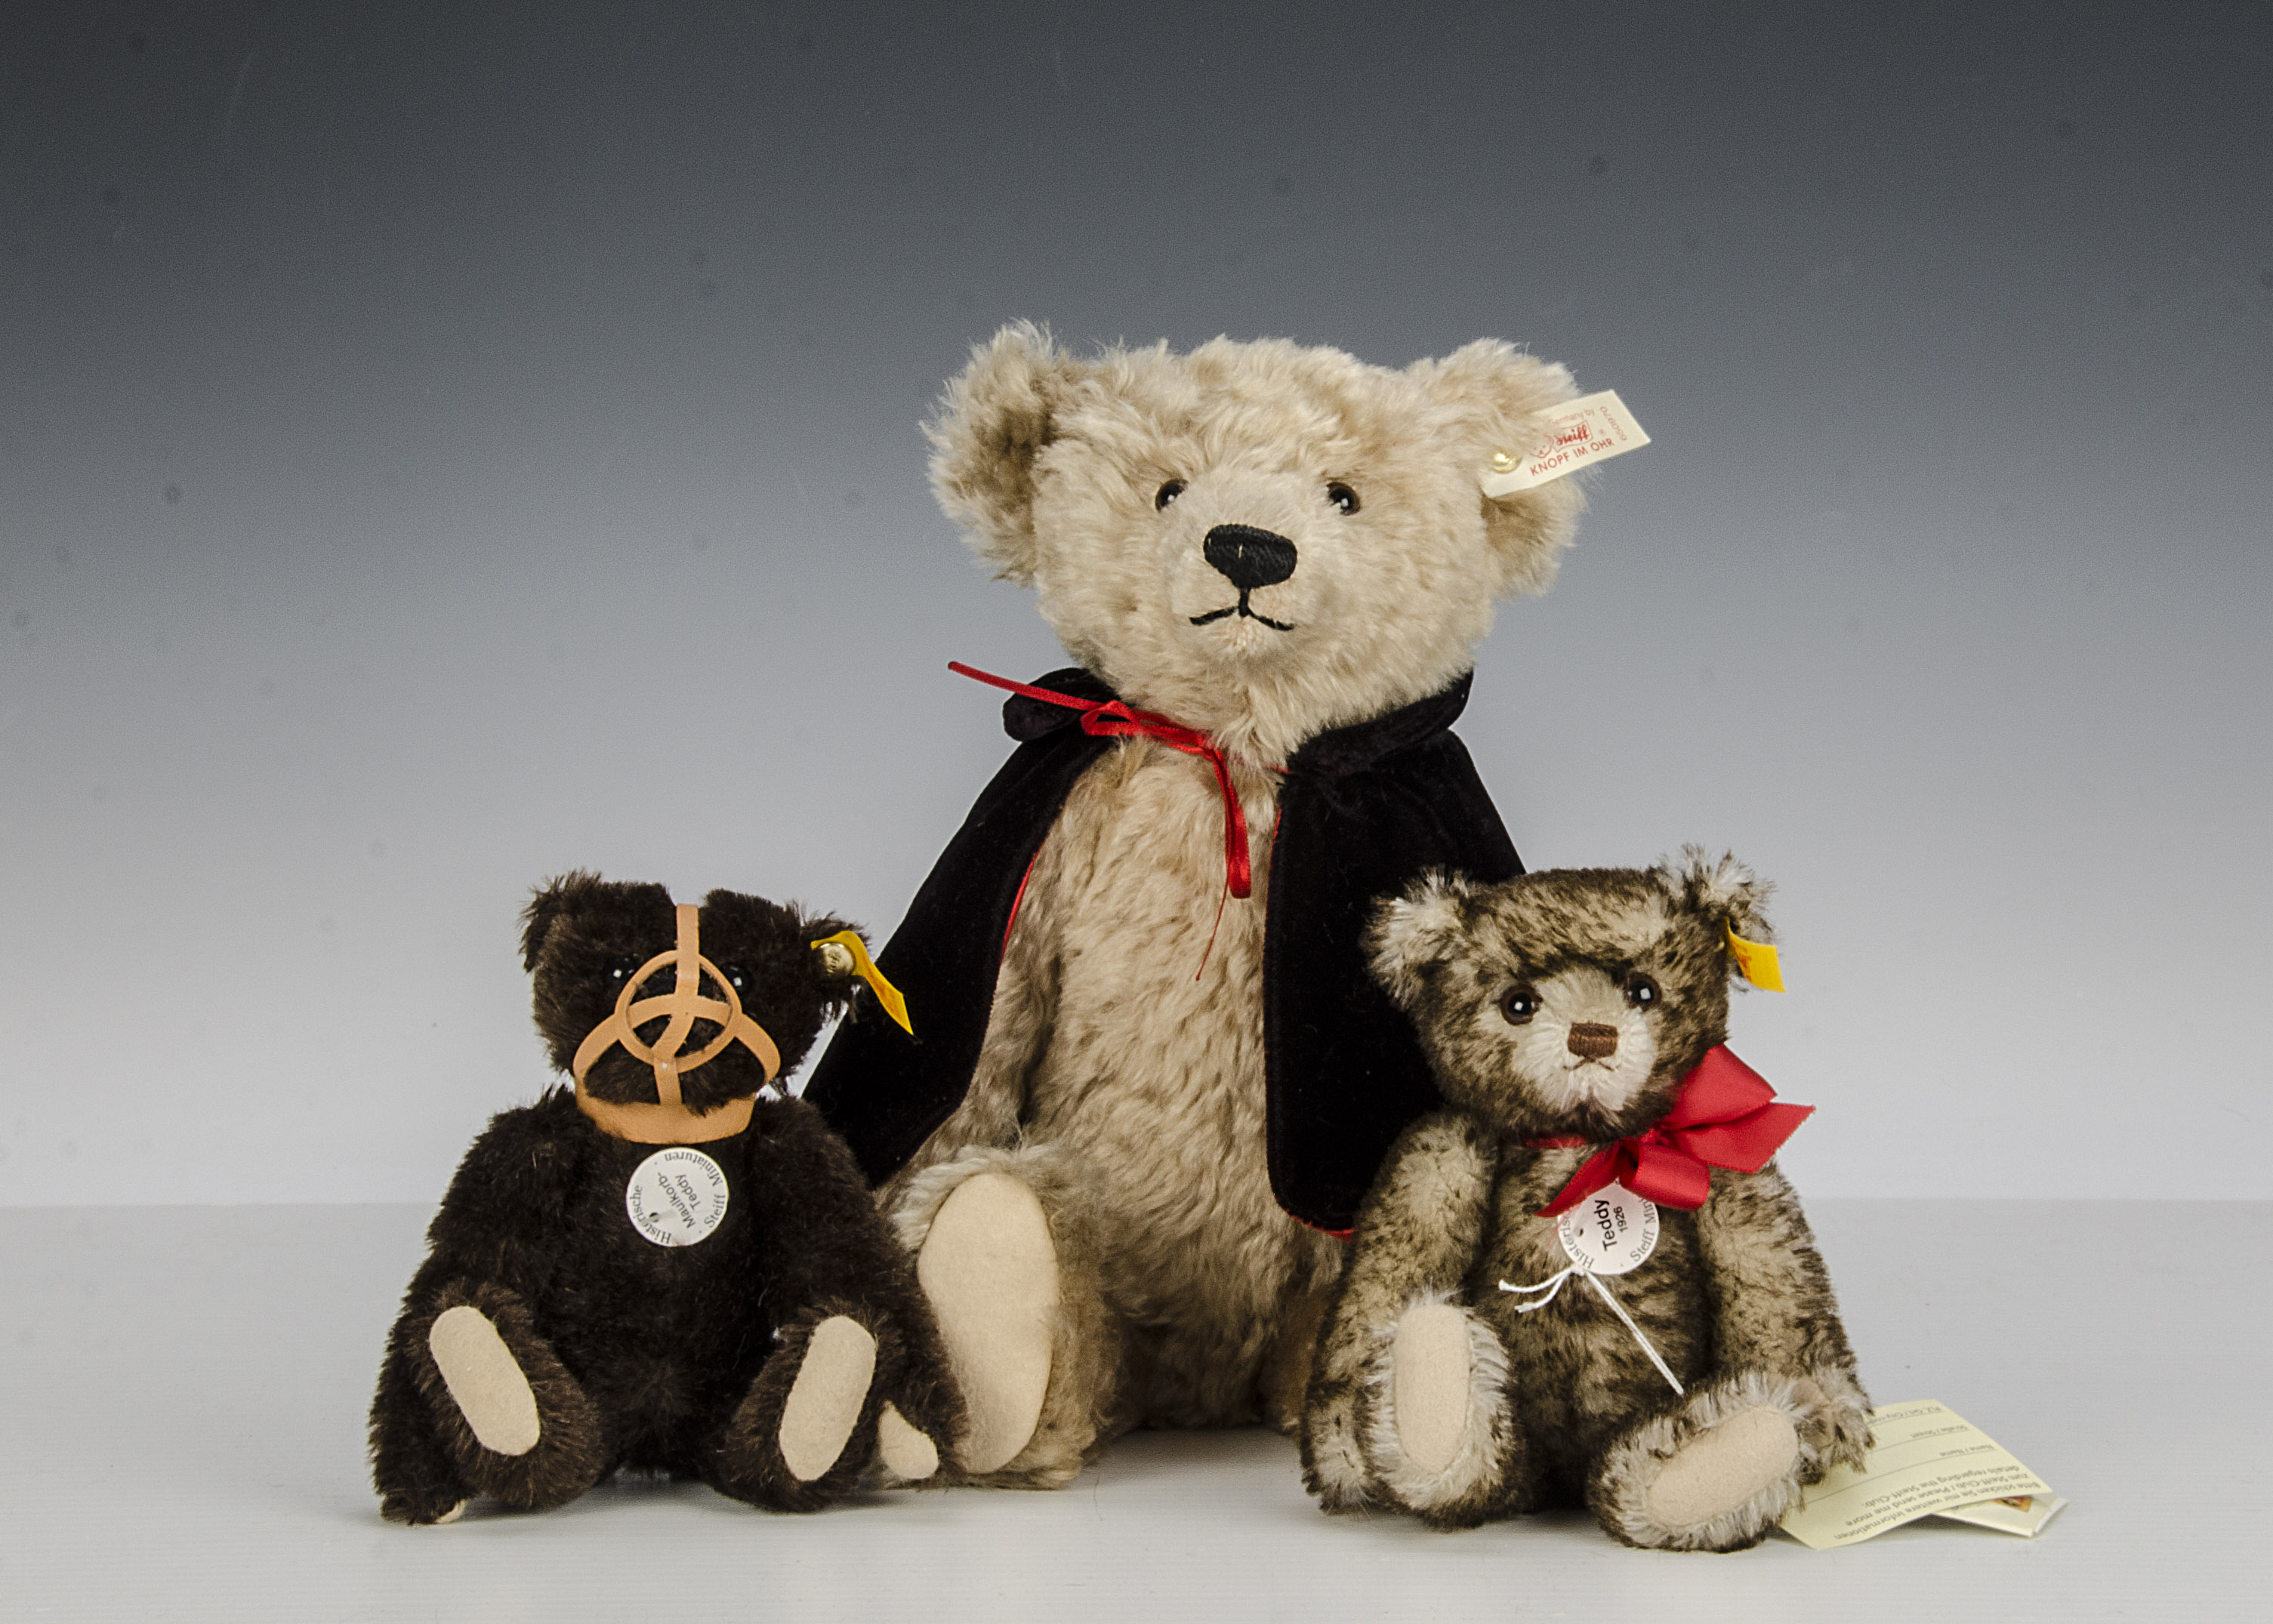 A Steiff Limited Edition LiebhaBear, 290 of 2550, 1996 (missing most of his clothes); and two yellow